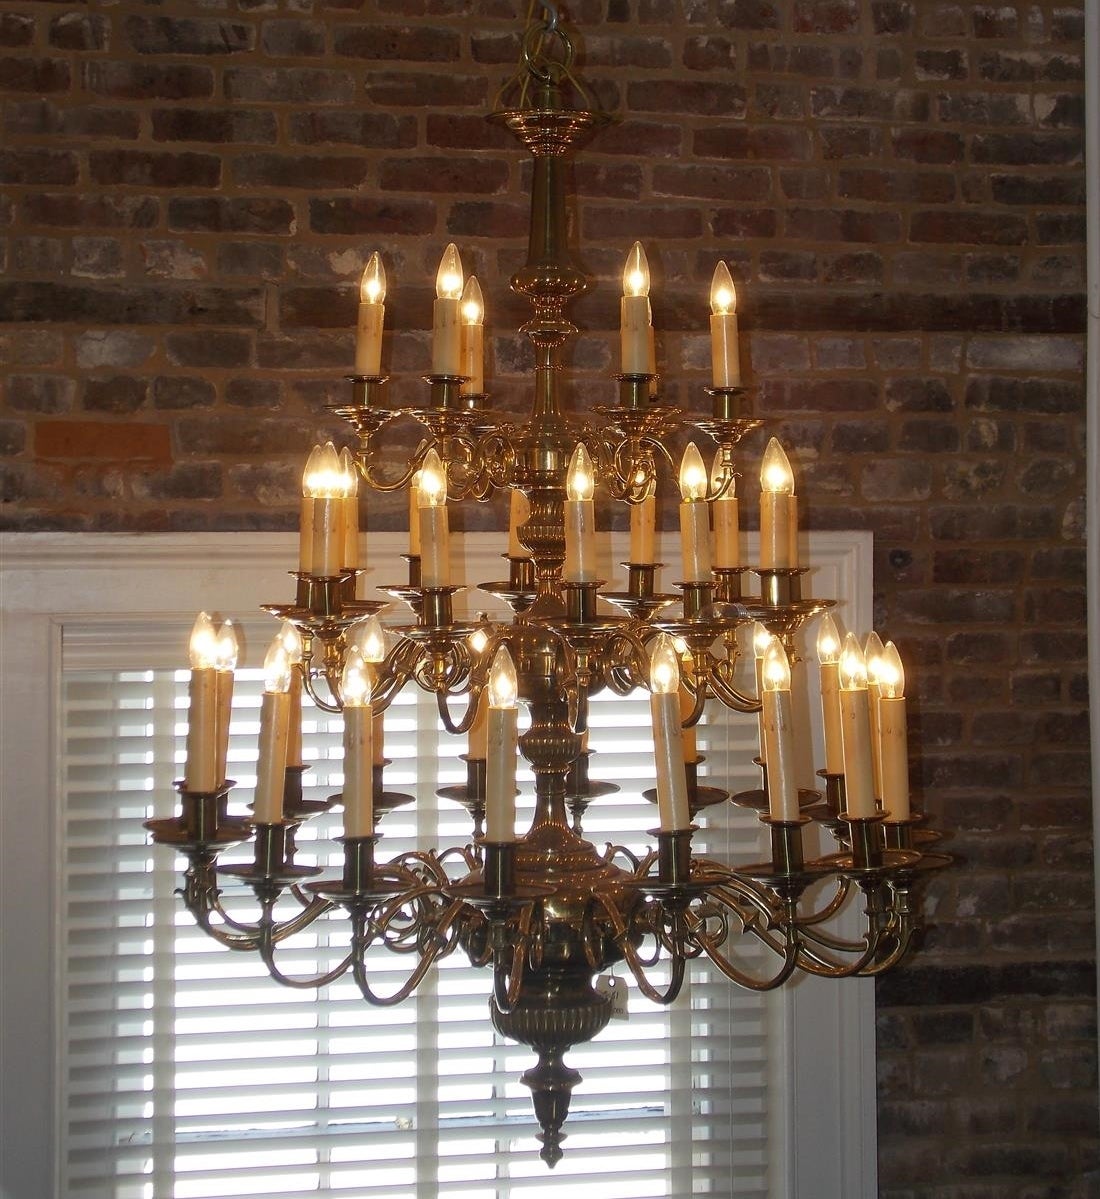 American brass monumental three-tier thirty-five light chandelier with centered bulbous turned ribbed column, scrolled spurred arms and terminating with a large decorative finial. Originally candle powered and has been electrified, Mid-19th century.